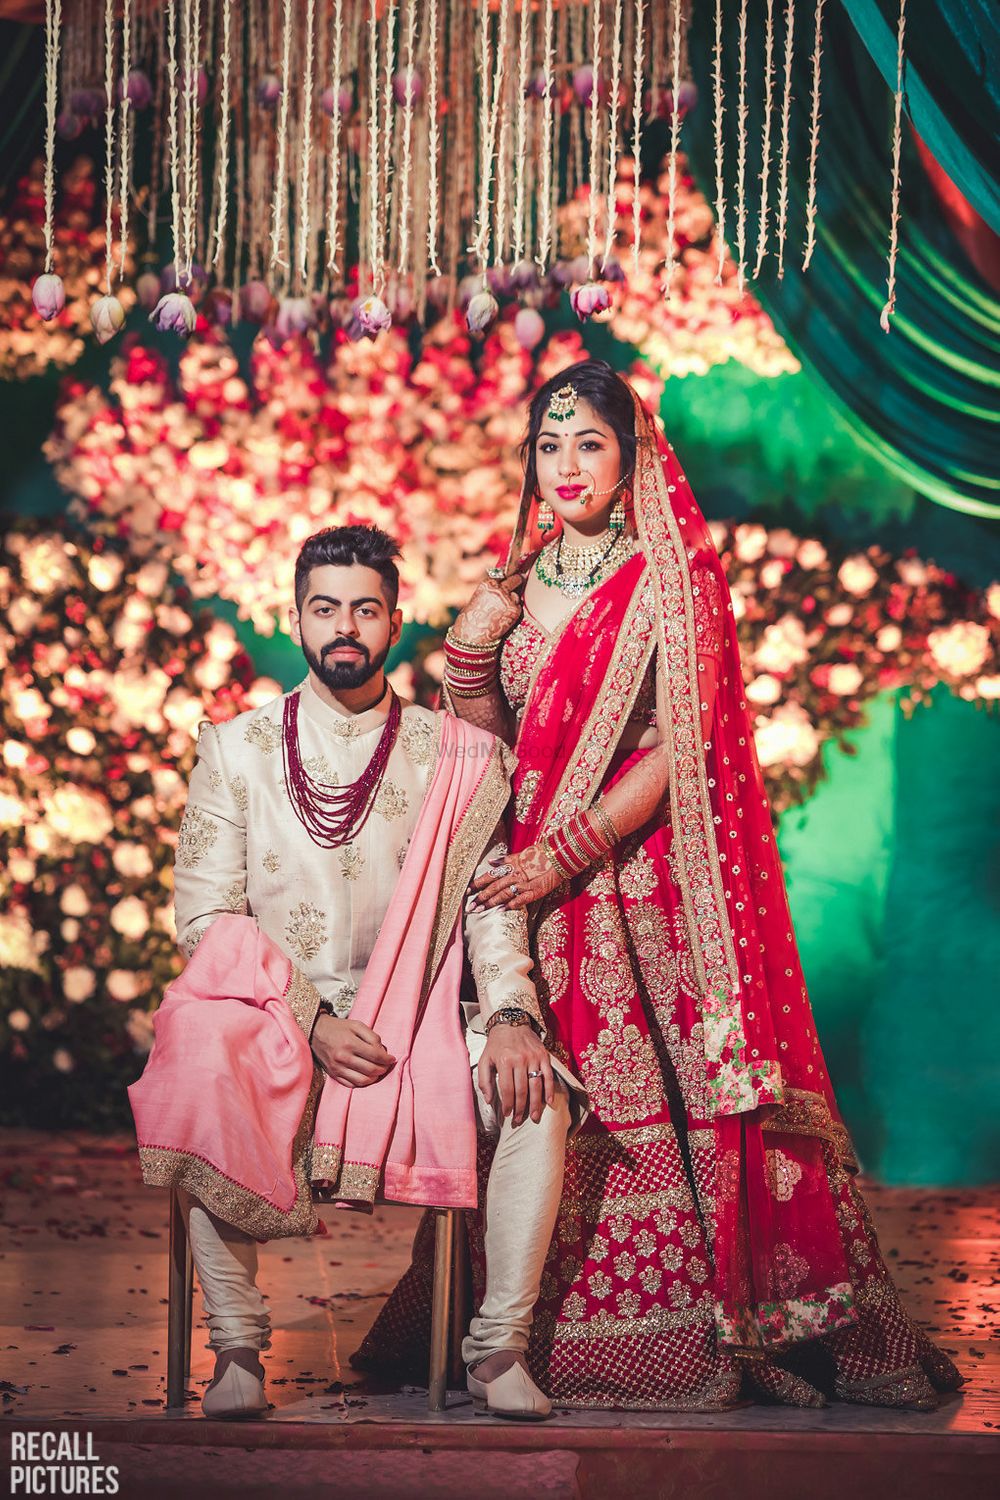 Photo of Groom in white and bride in red lehenga